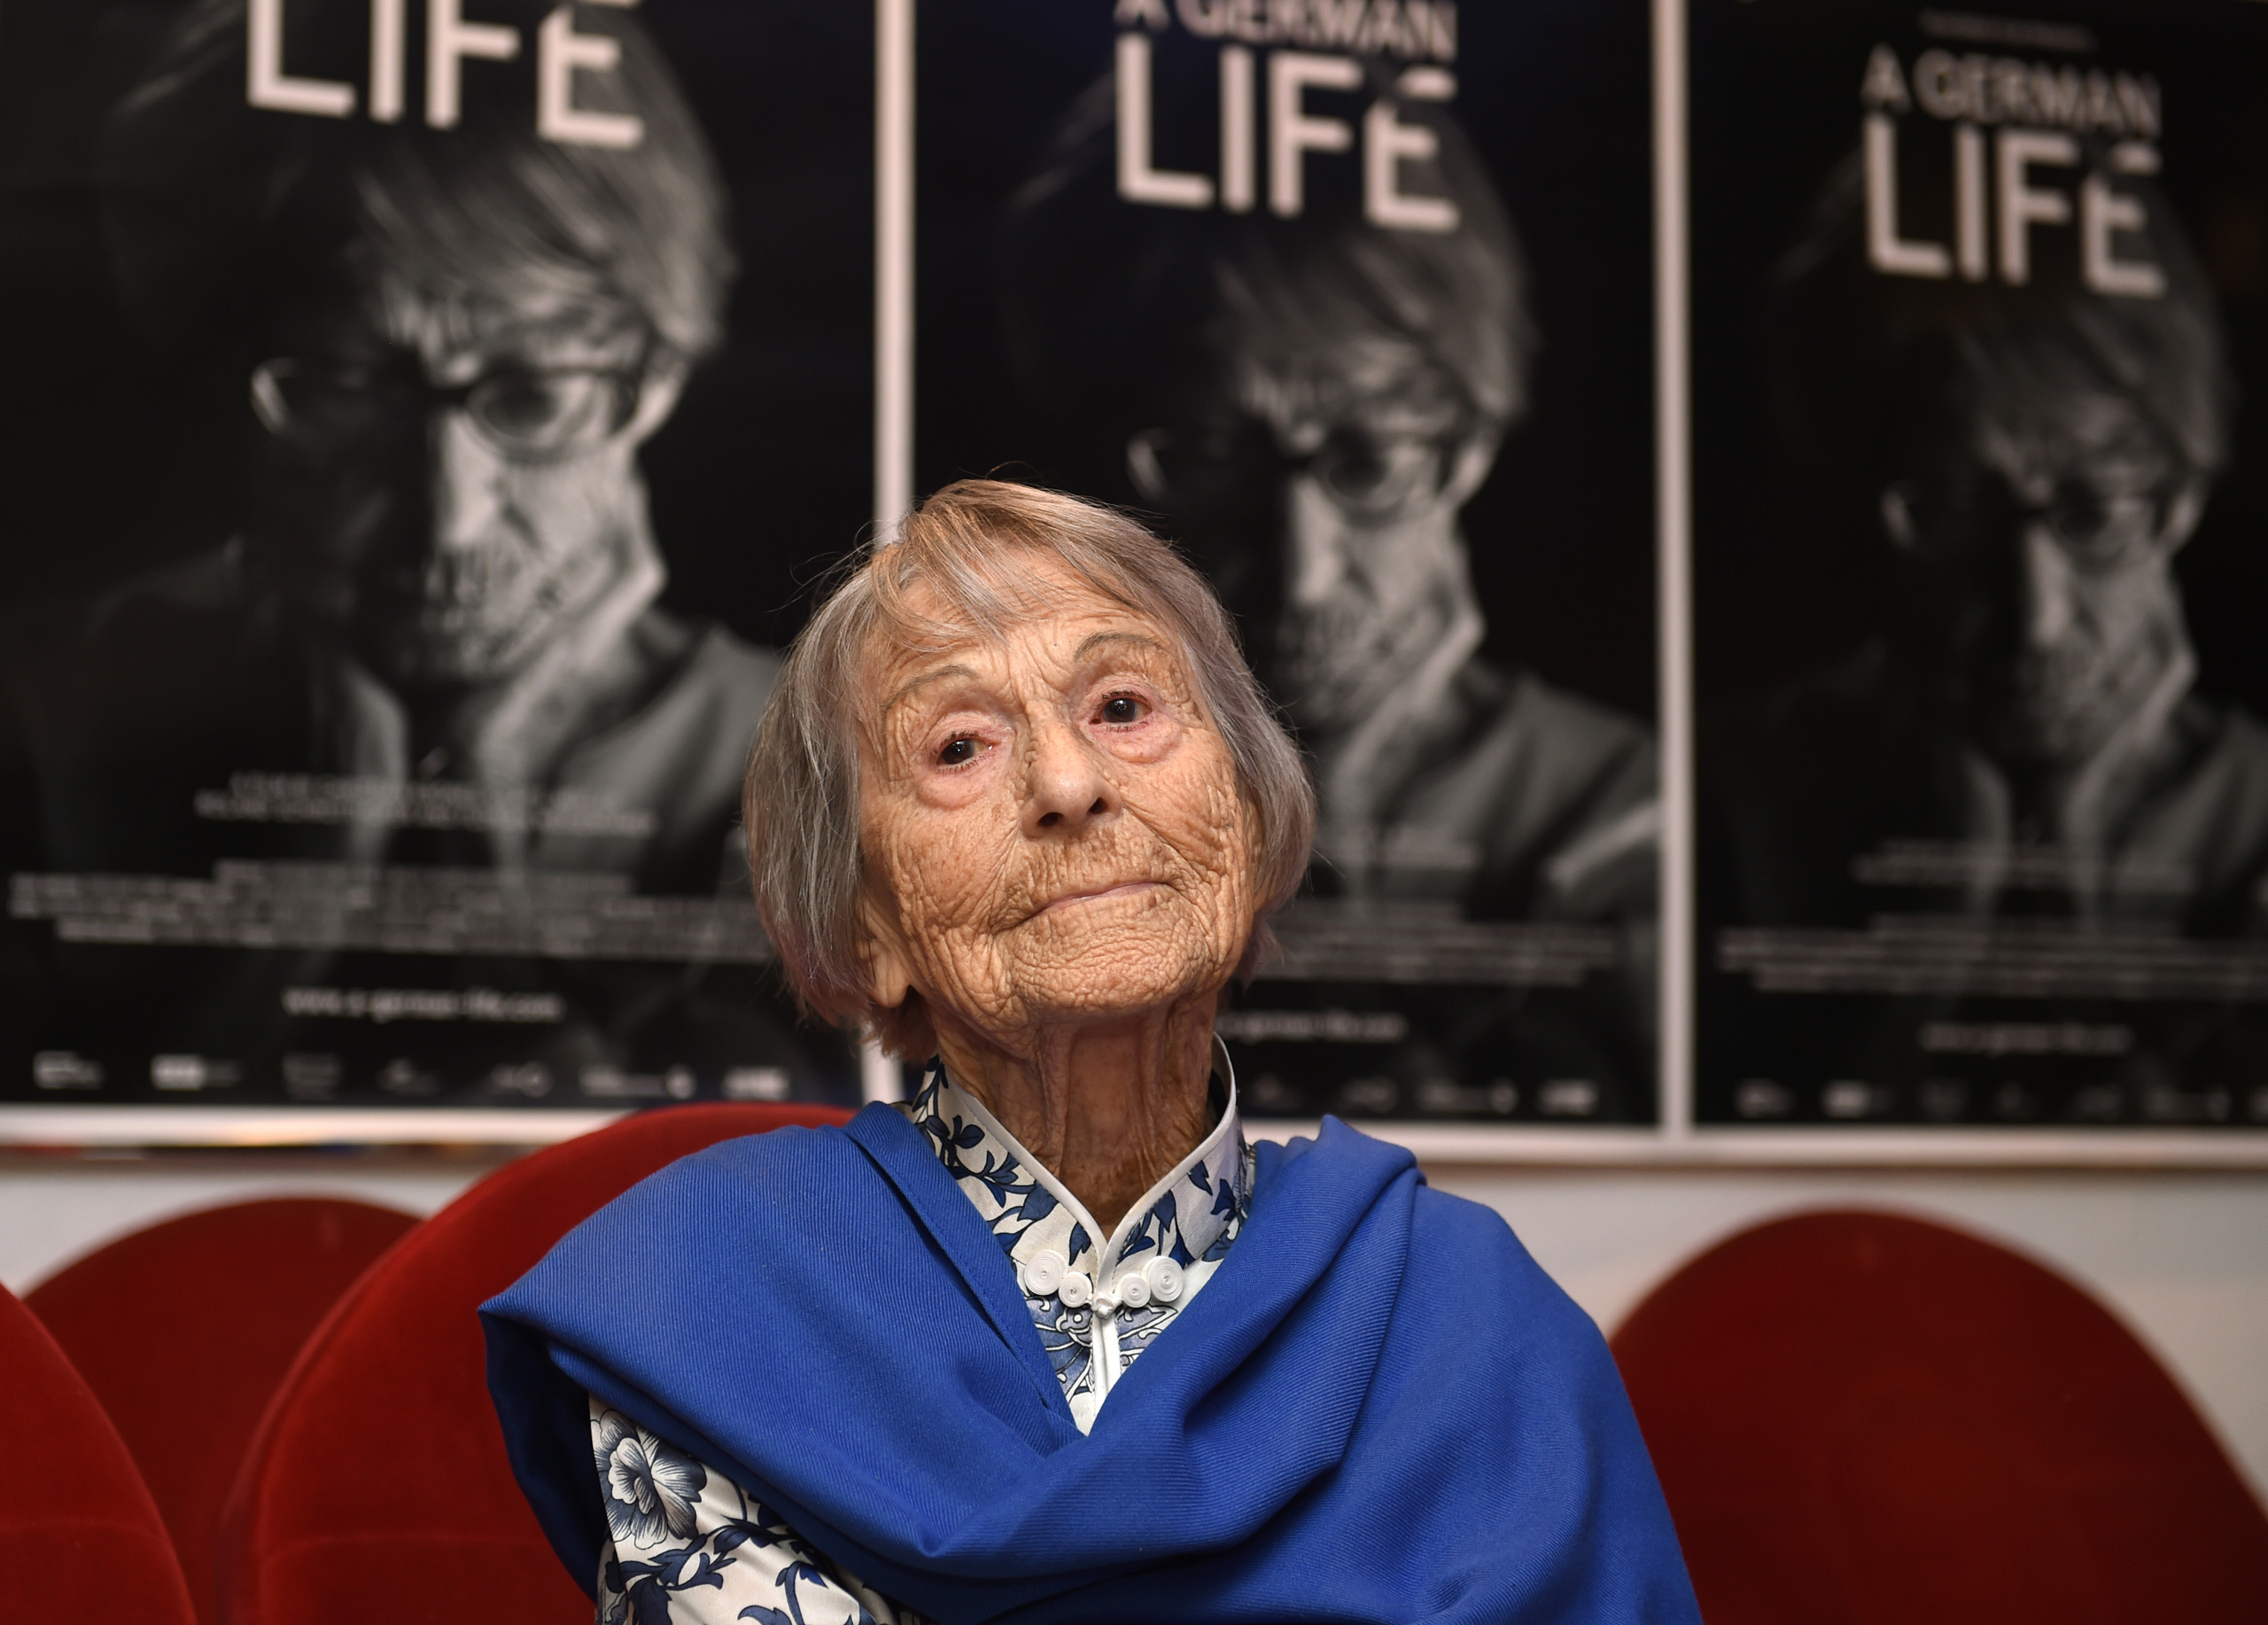 Brunhilde Pomsel, former secretary of Nazi propaganda chief Joseph Goebbels, sits on a cinema chair in front of posters for the movie "A German life" in a cinema in Munich, southern Germany, on June 29, 2016. (Christof Stache—AFP/Getty Images)